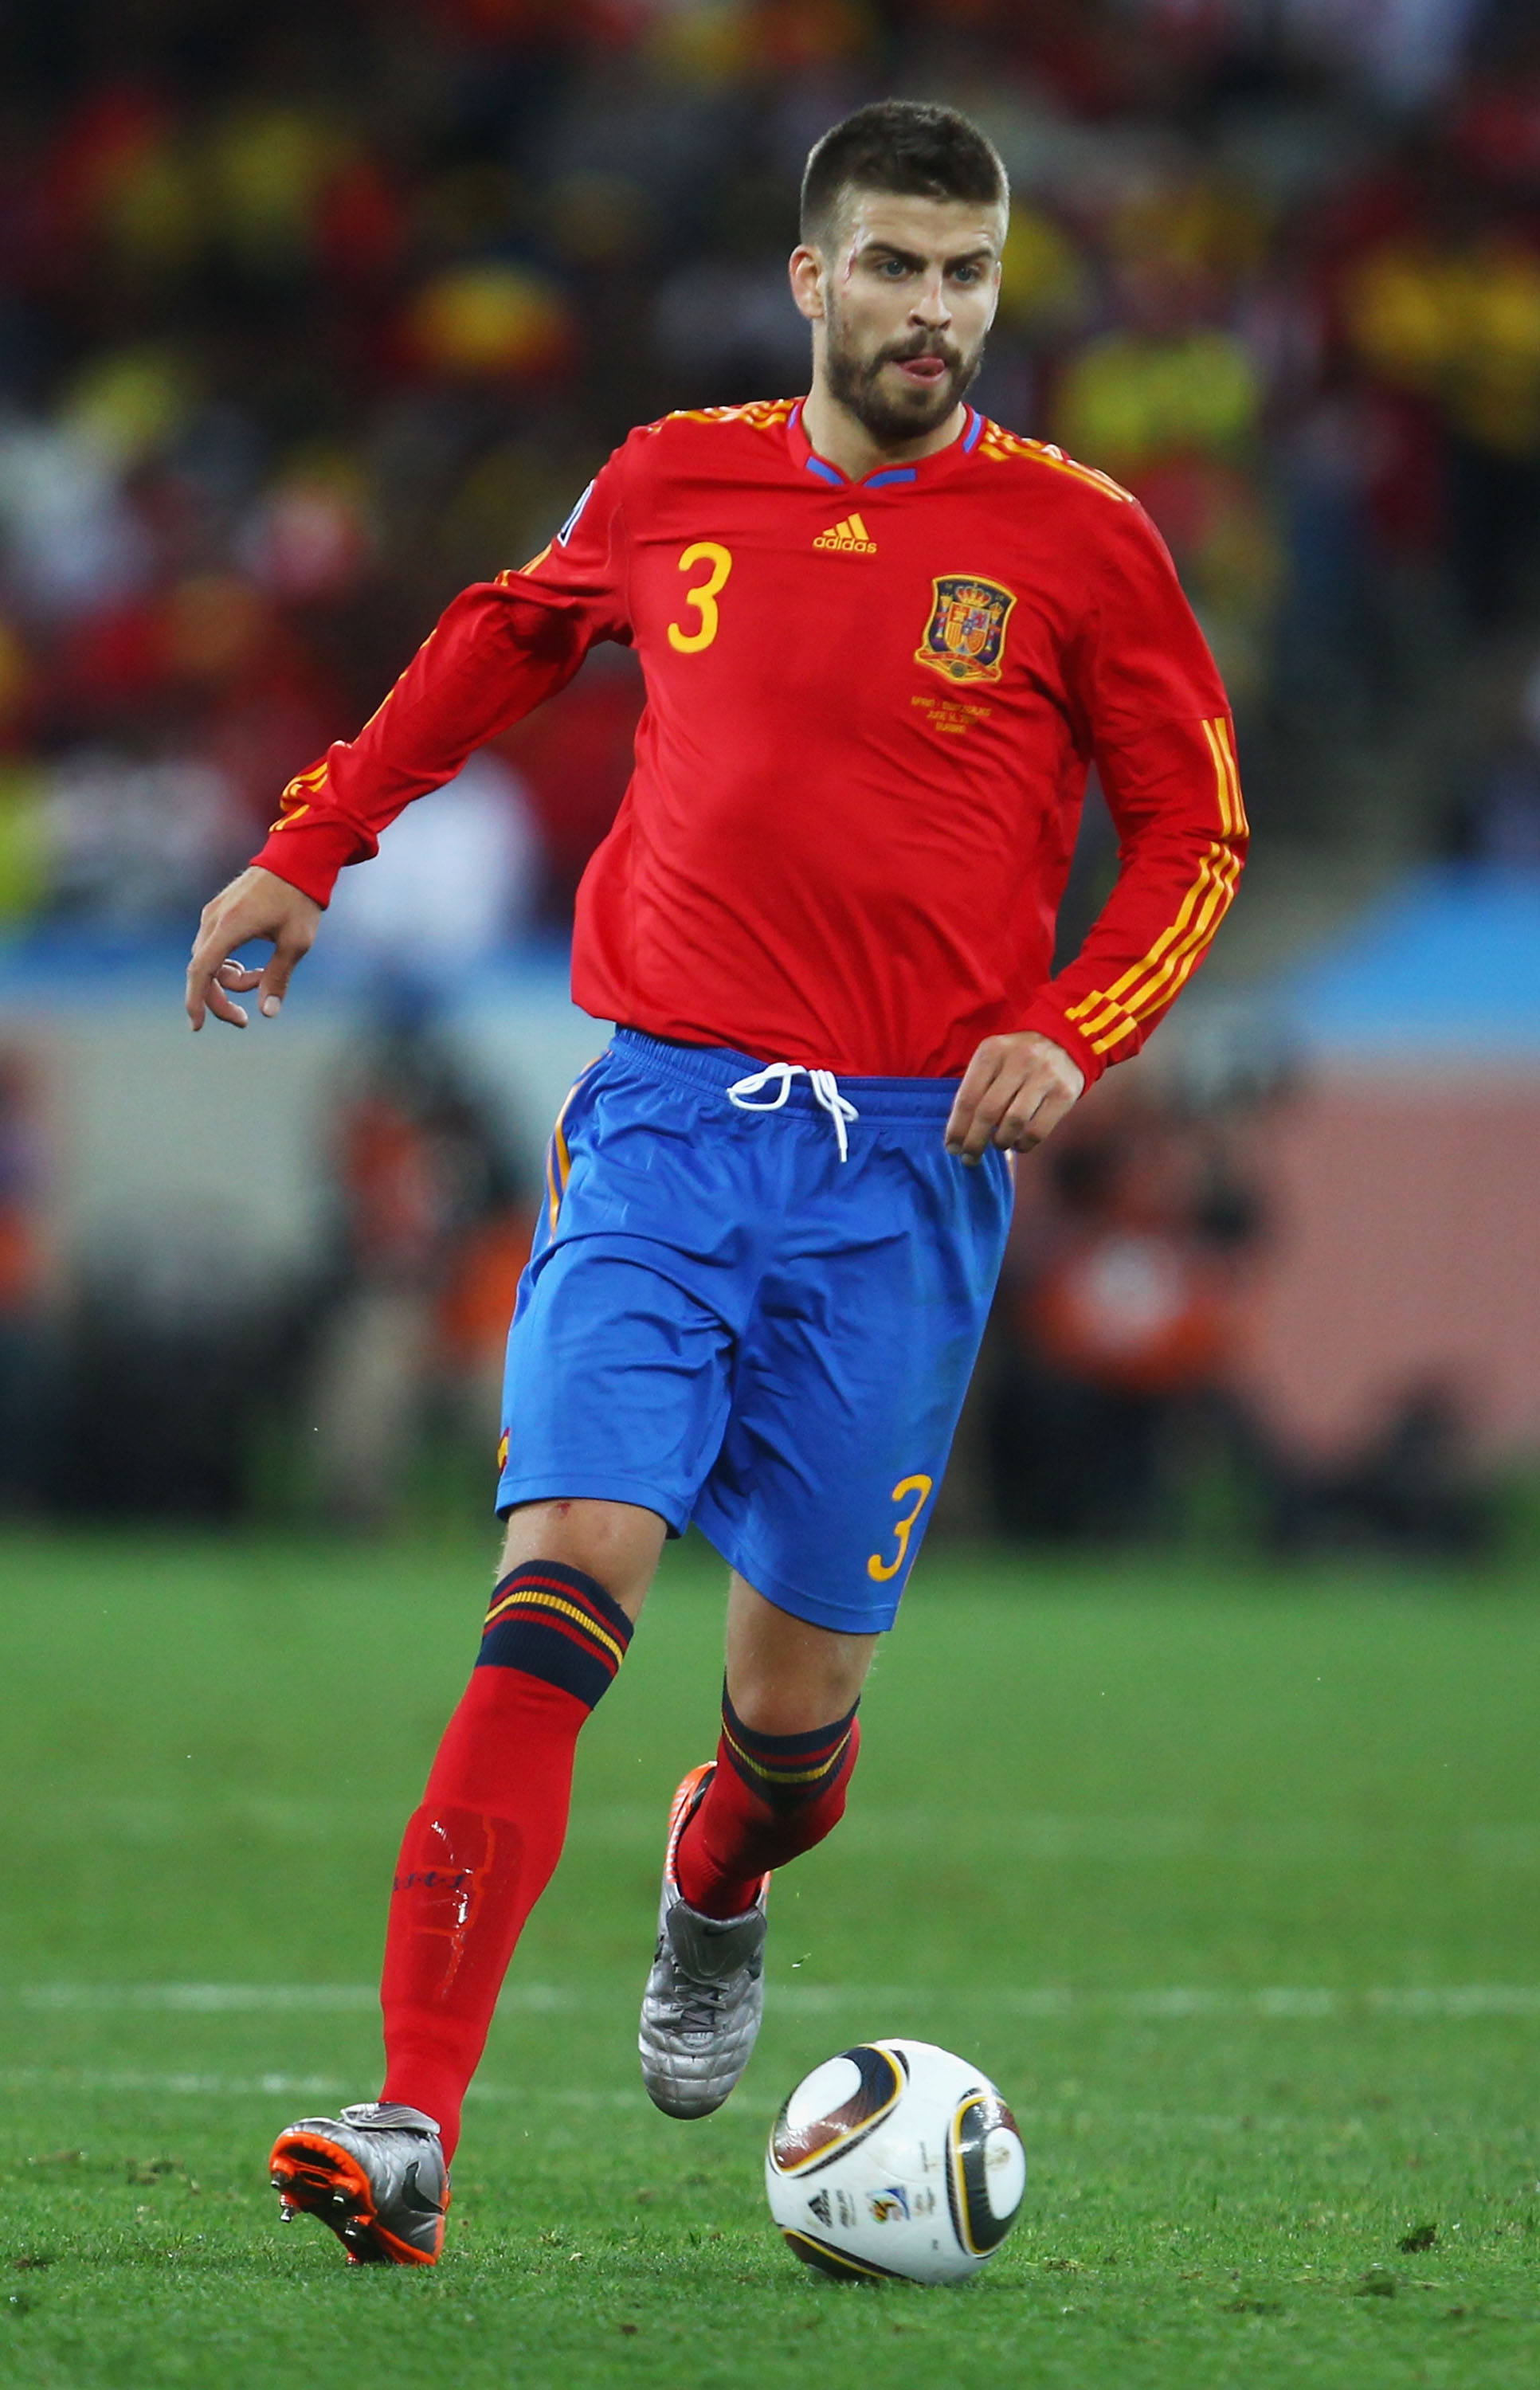 DURBAN, SOUTH AFRICA - JUNE 16:  Gerard Pique of Spain runs with the ball during the 2010 FIFA World Cup South Africa Group H match between Spain and Switzerland at Durban Stadium on June 16, 2010 in Durban, South Africa.  (Photo by Lars Baron/Getty Image